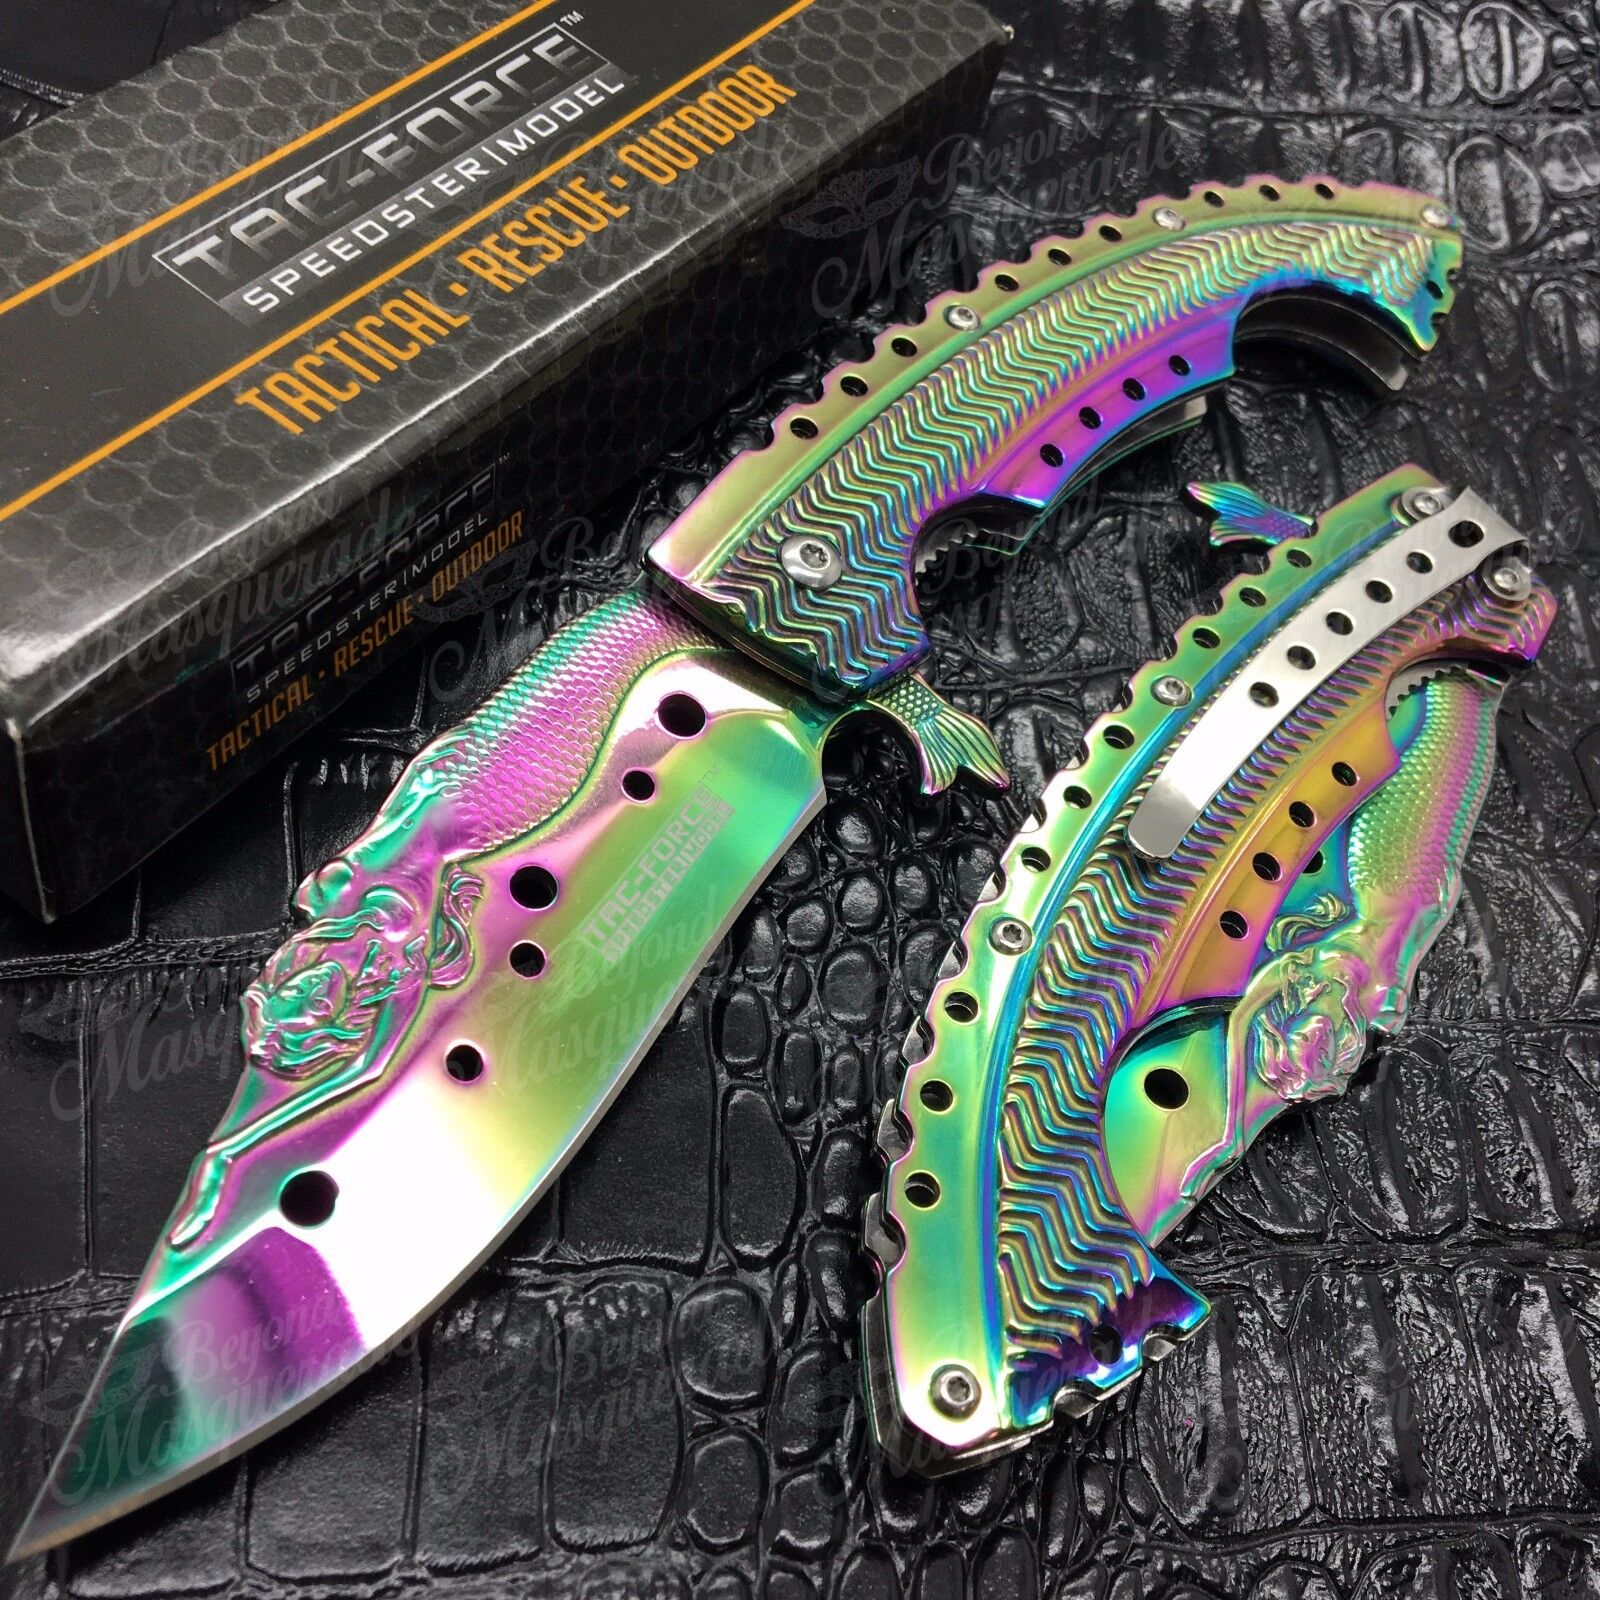 Tac Force Collectors 3D Mermaid Spring Assisted Rescue Pocketknife [Rainbow] Tac-Force TF-864RB